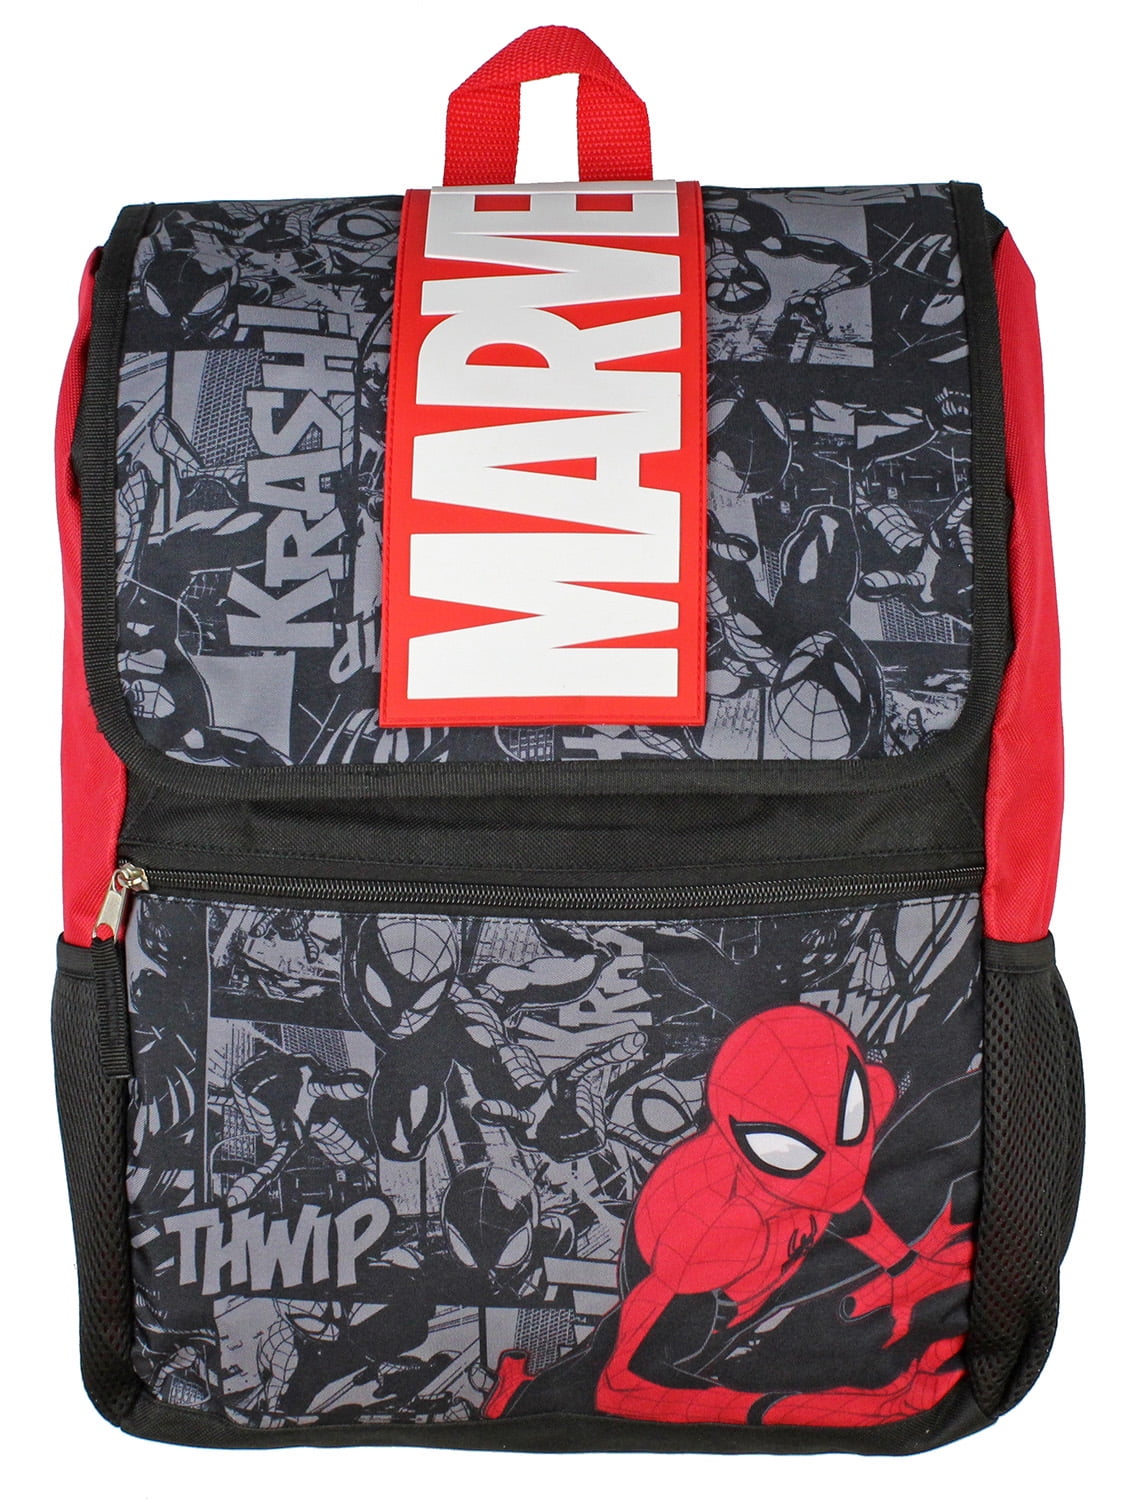 Details about   The Amazing Spiderman Backpack NEW School Book Bag 15x12 plus Smencil & Ruler 